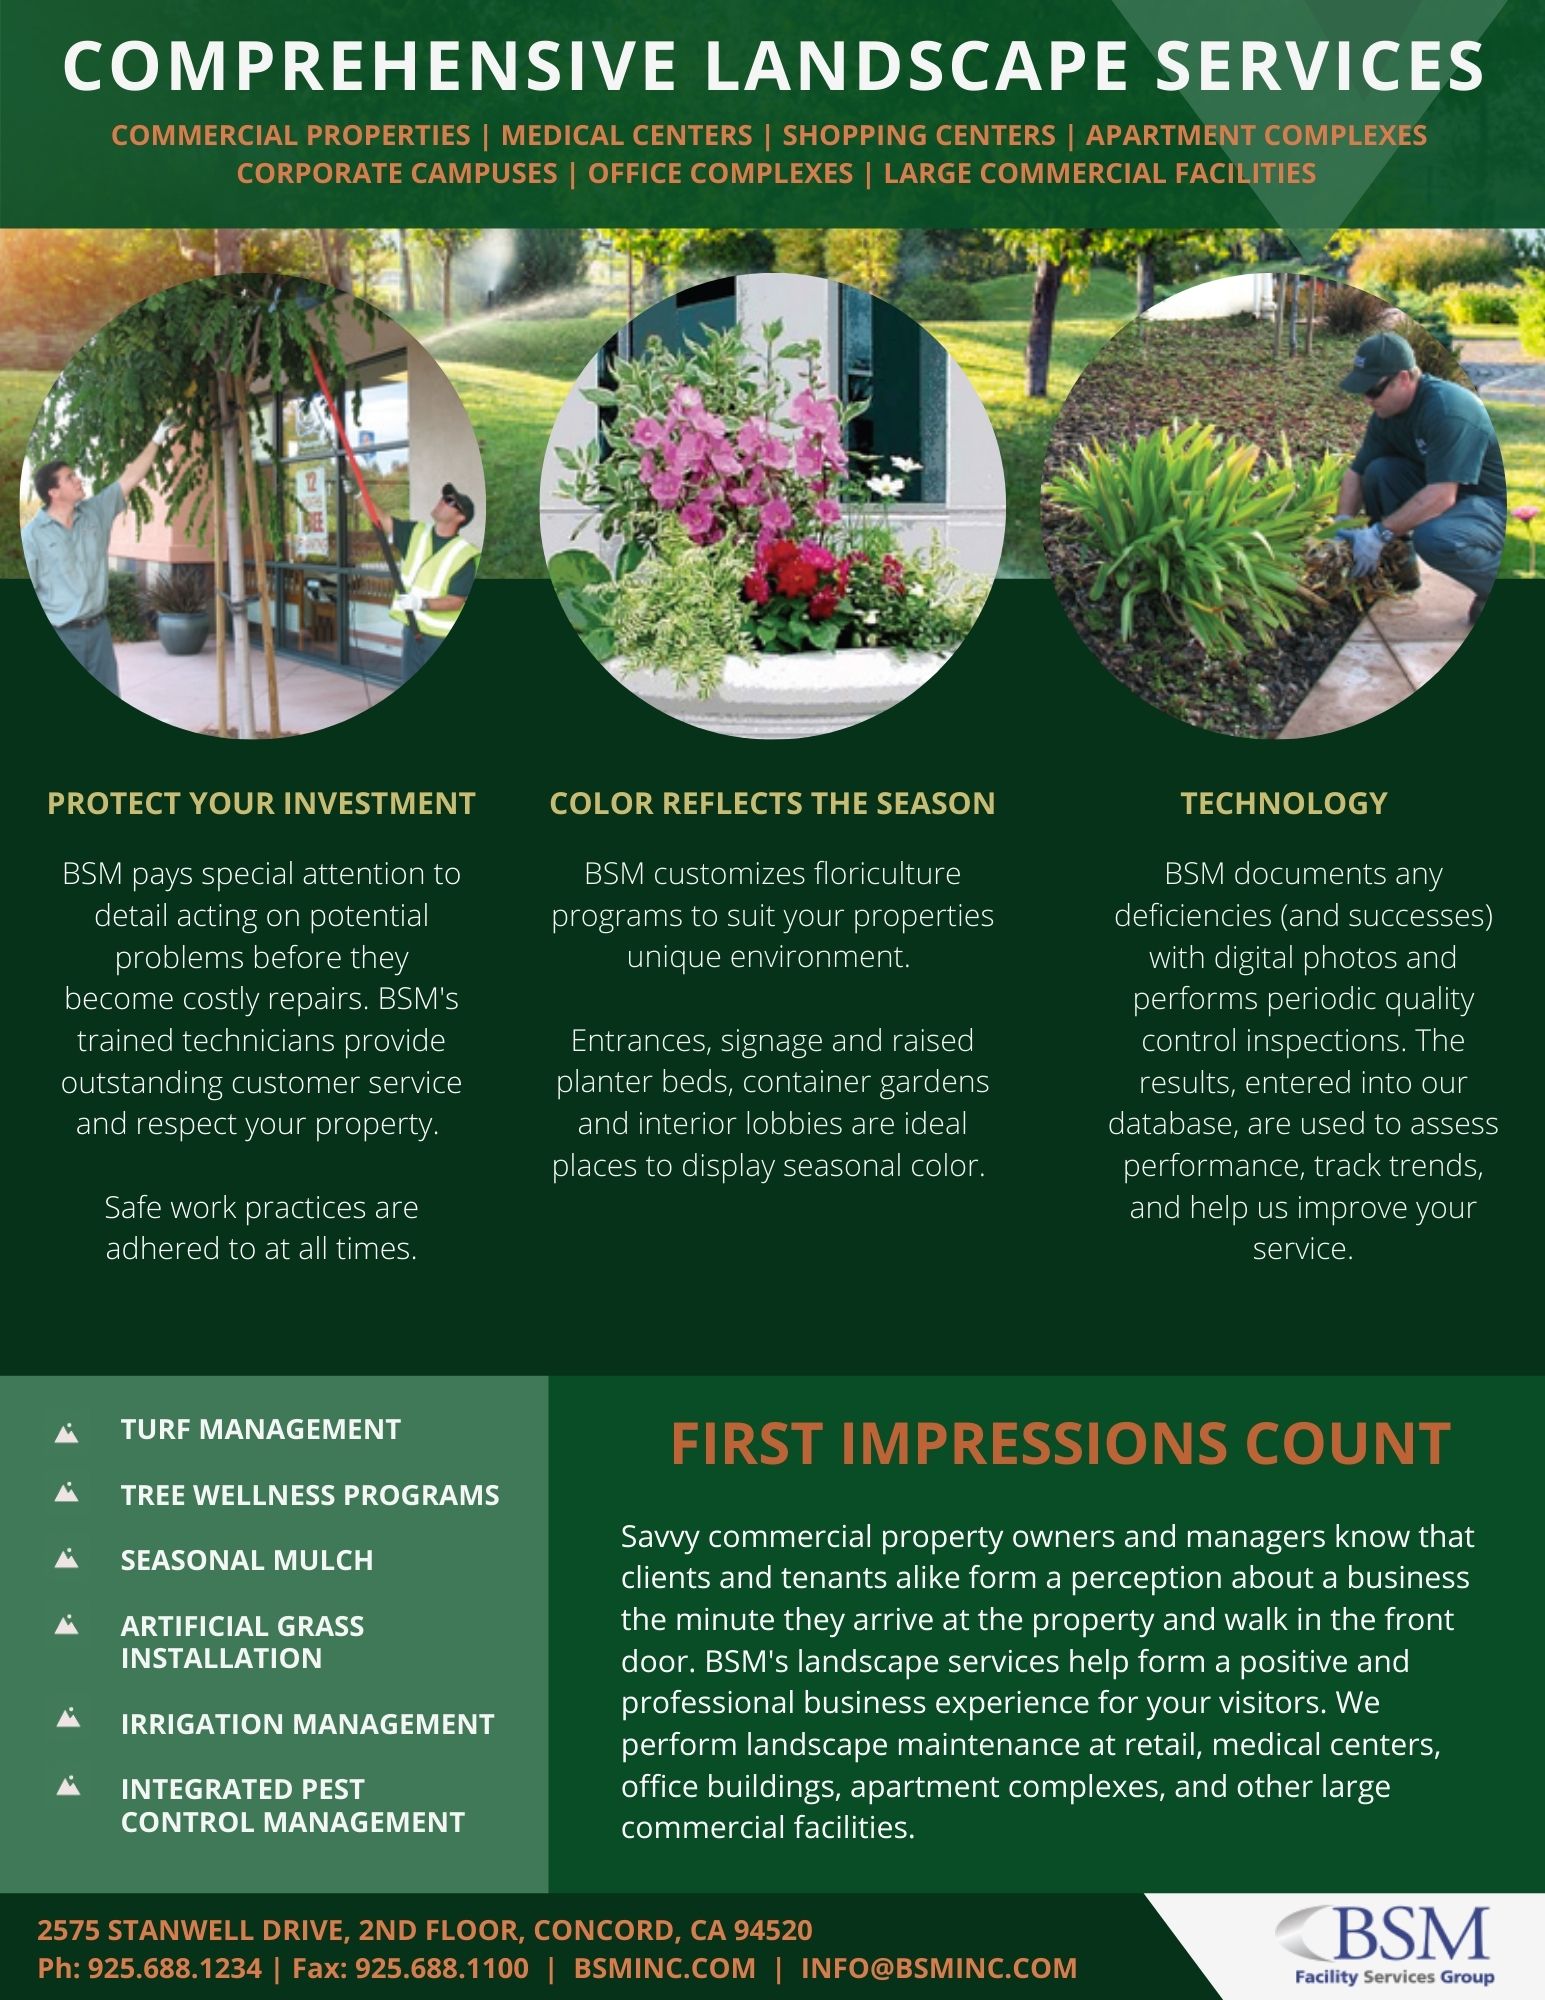 Landscaping for Condo and Town homes